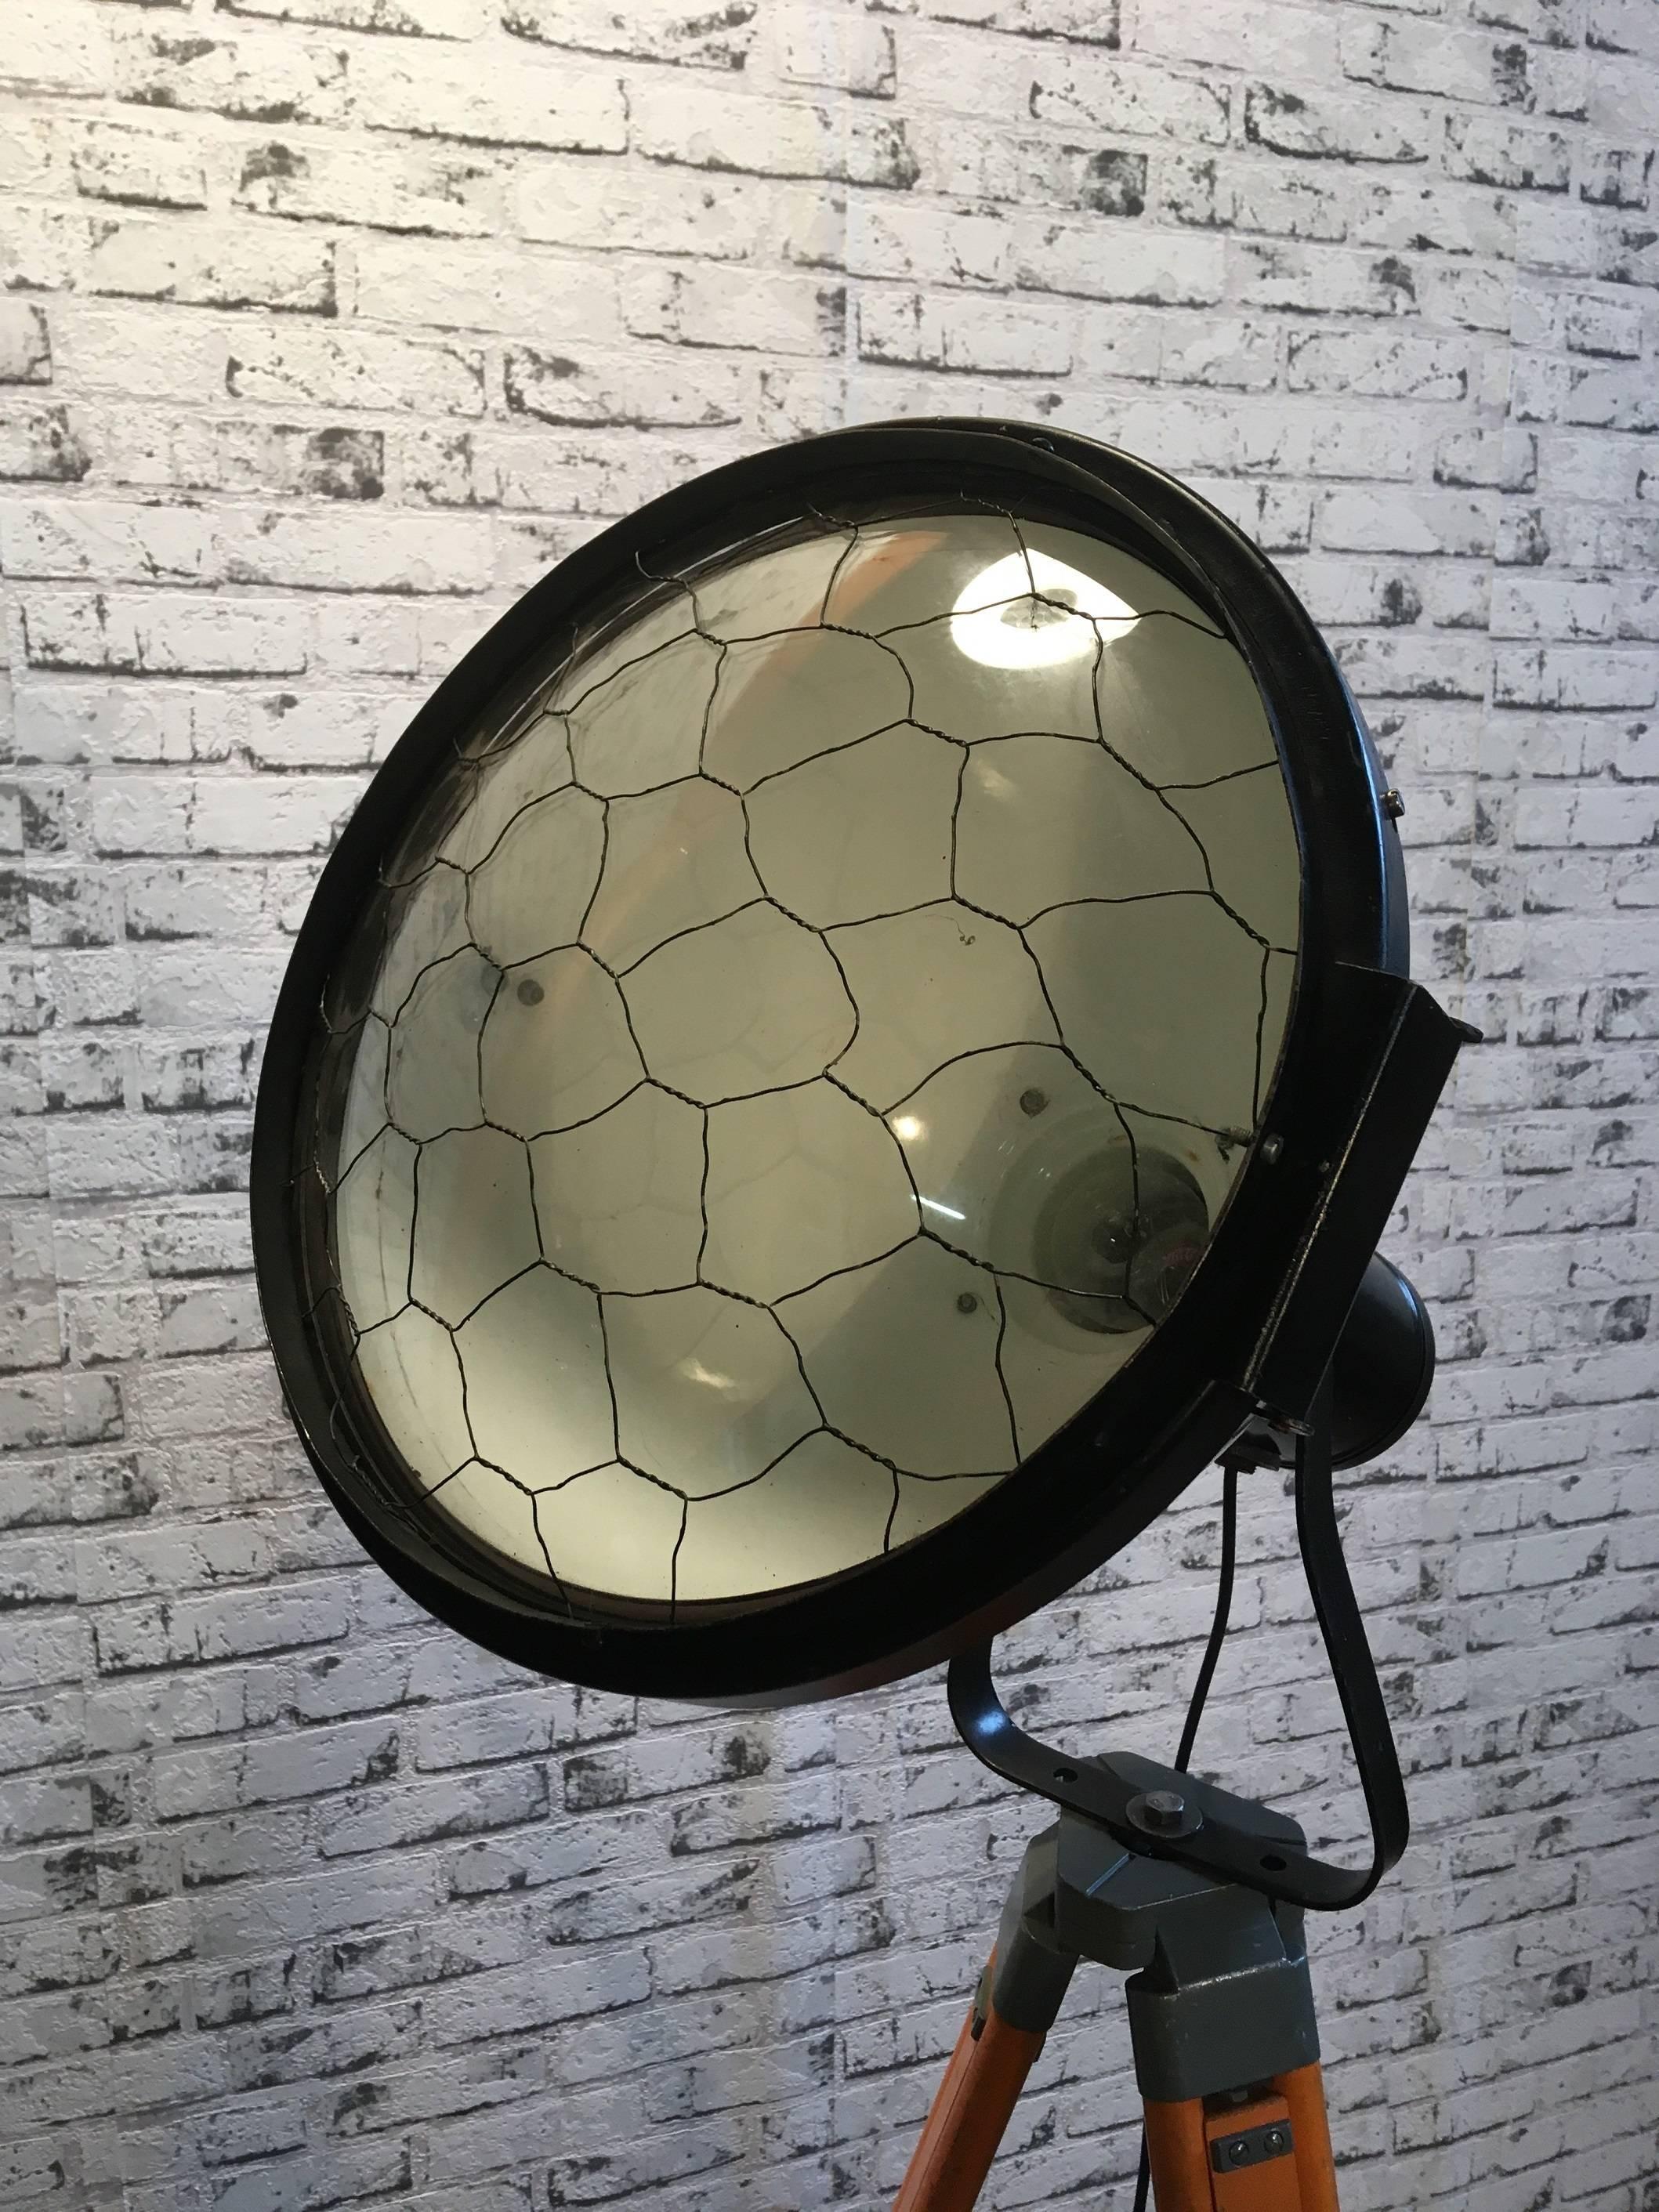 This industrial enameled reflector stands on a wooden tripod.It was produced in former Czechoslovakia during the 1950s. Lamp has new porcelain socket for E 27 lightbulbs and wire.
Measures: Height 153.0 cm
Depth 50.0 cm
Diameter 40 cm.